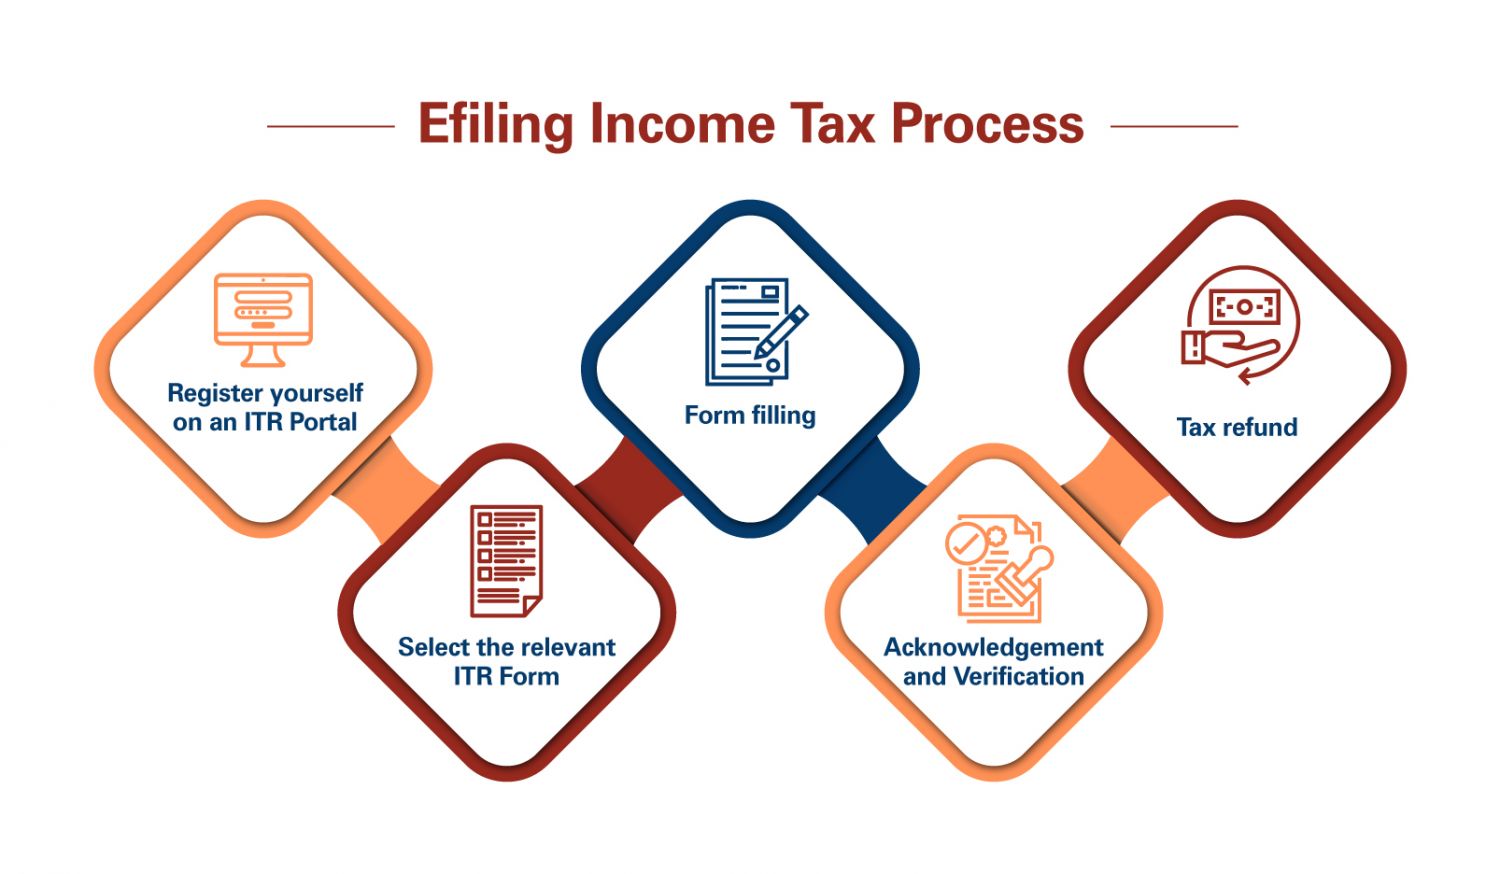 FAQS RELATED TO INCOME TAX RETURN FILLING IN INDIA